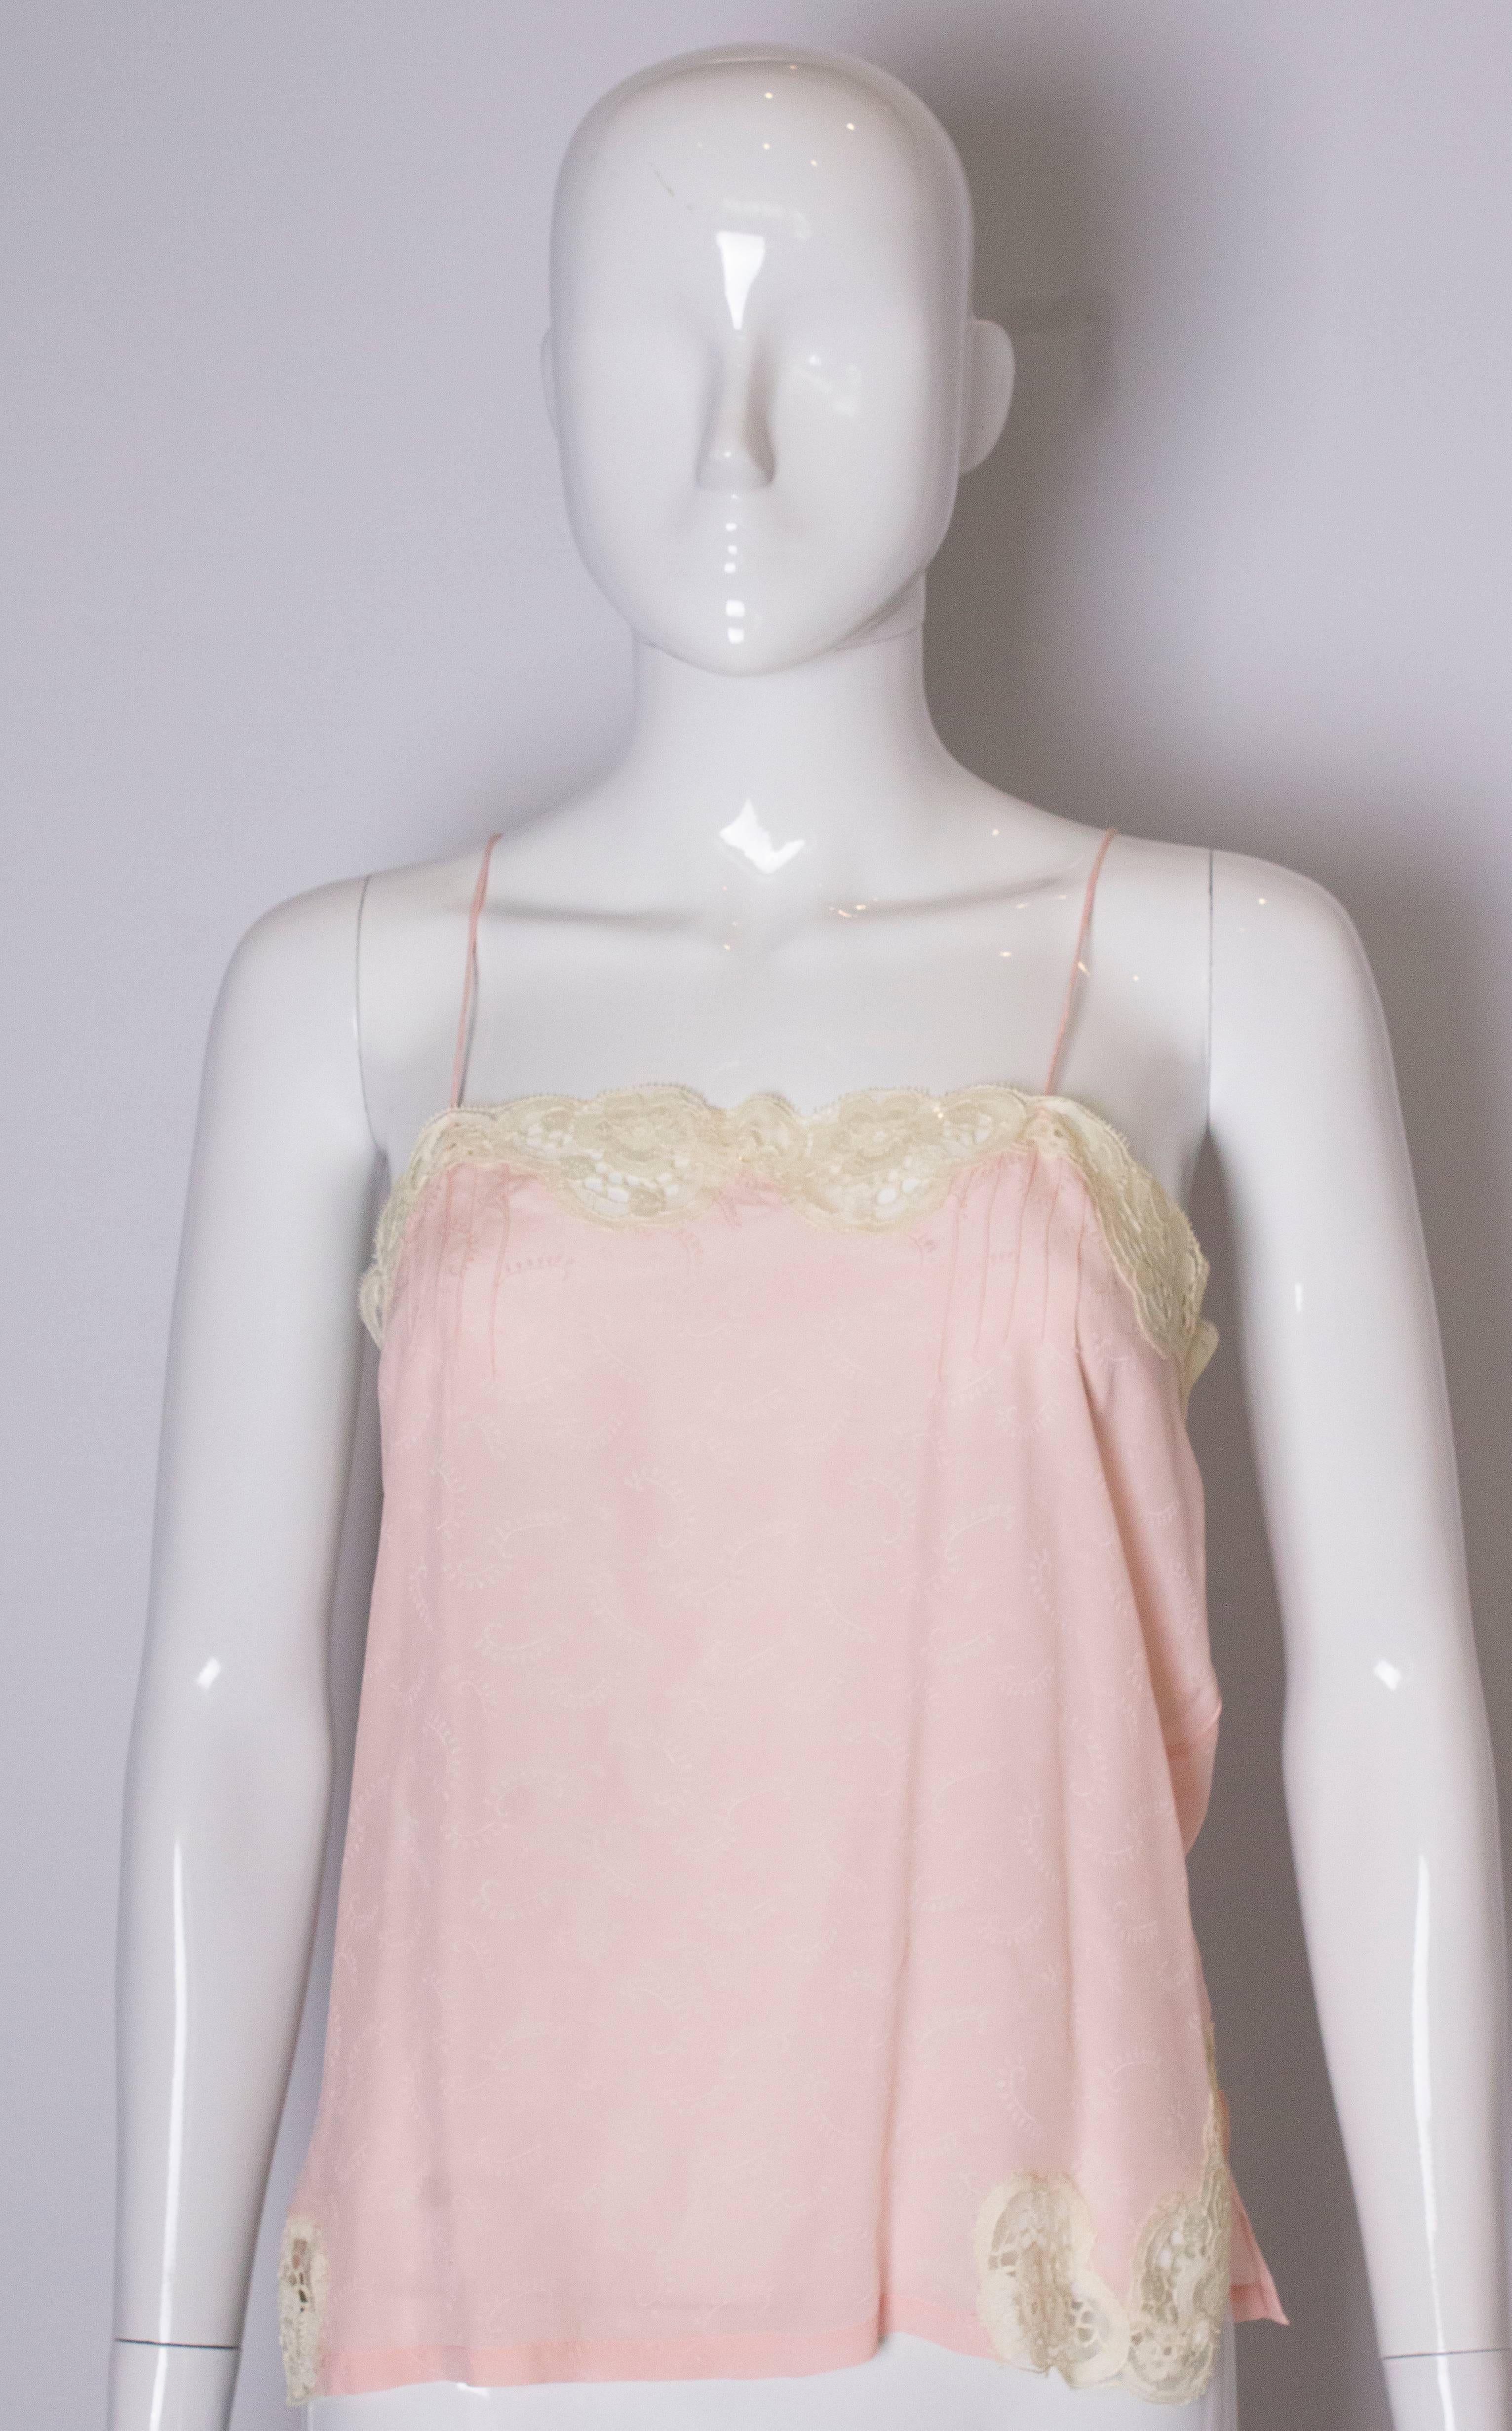 A pretty vintage cami top with lace detail  and pin tucks.
